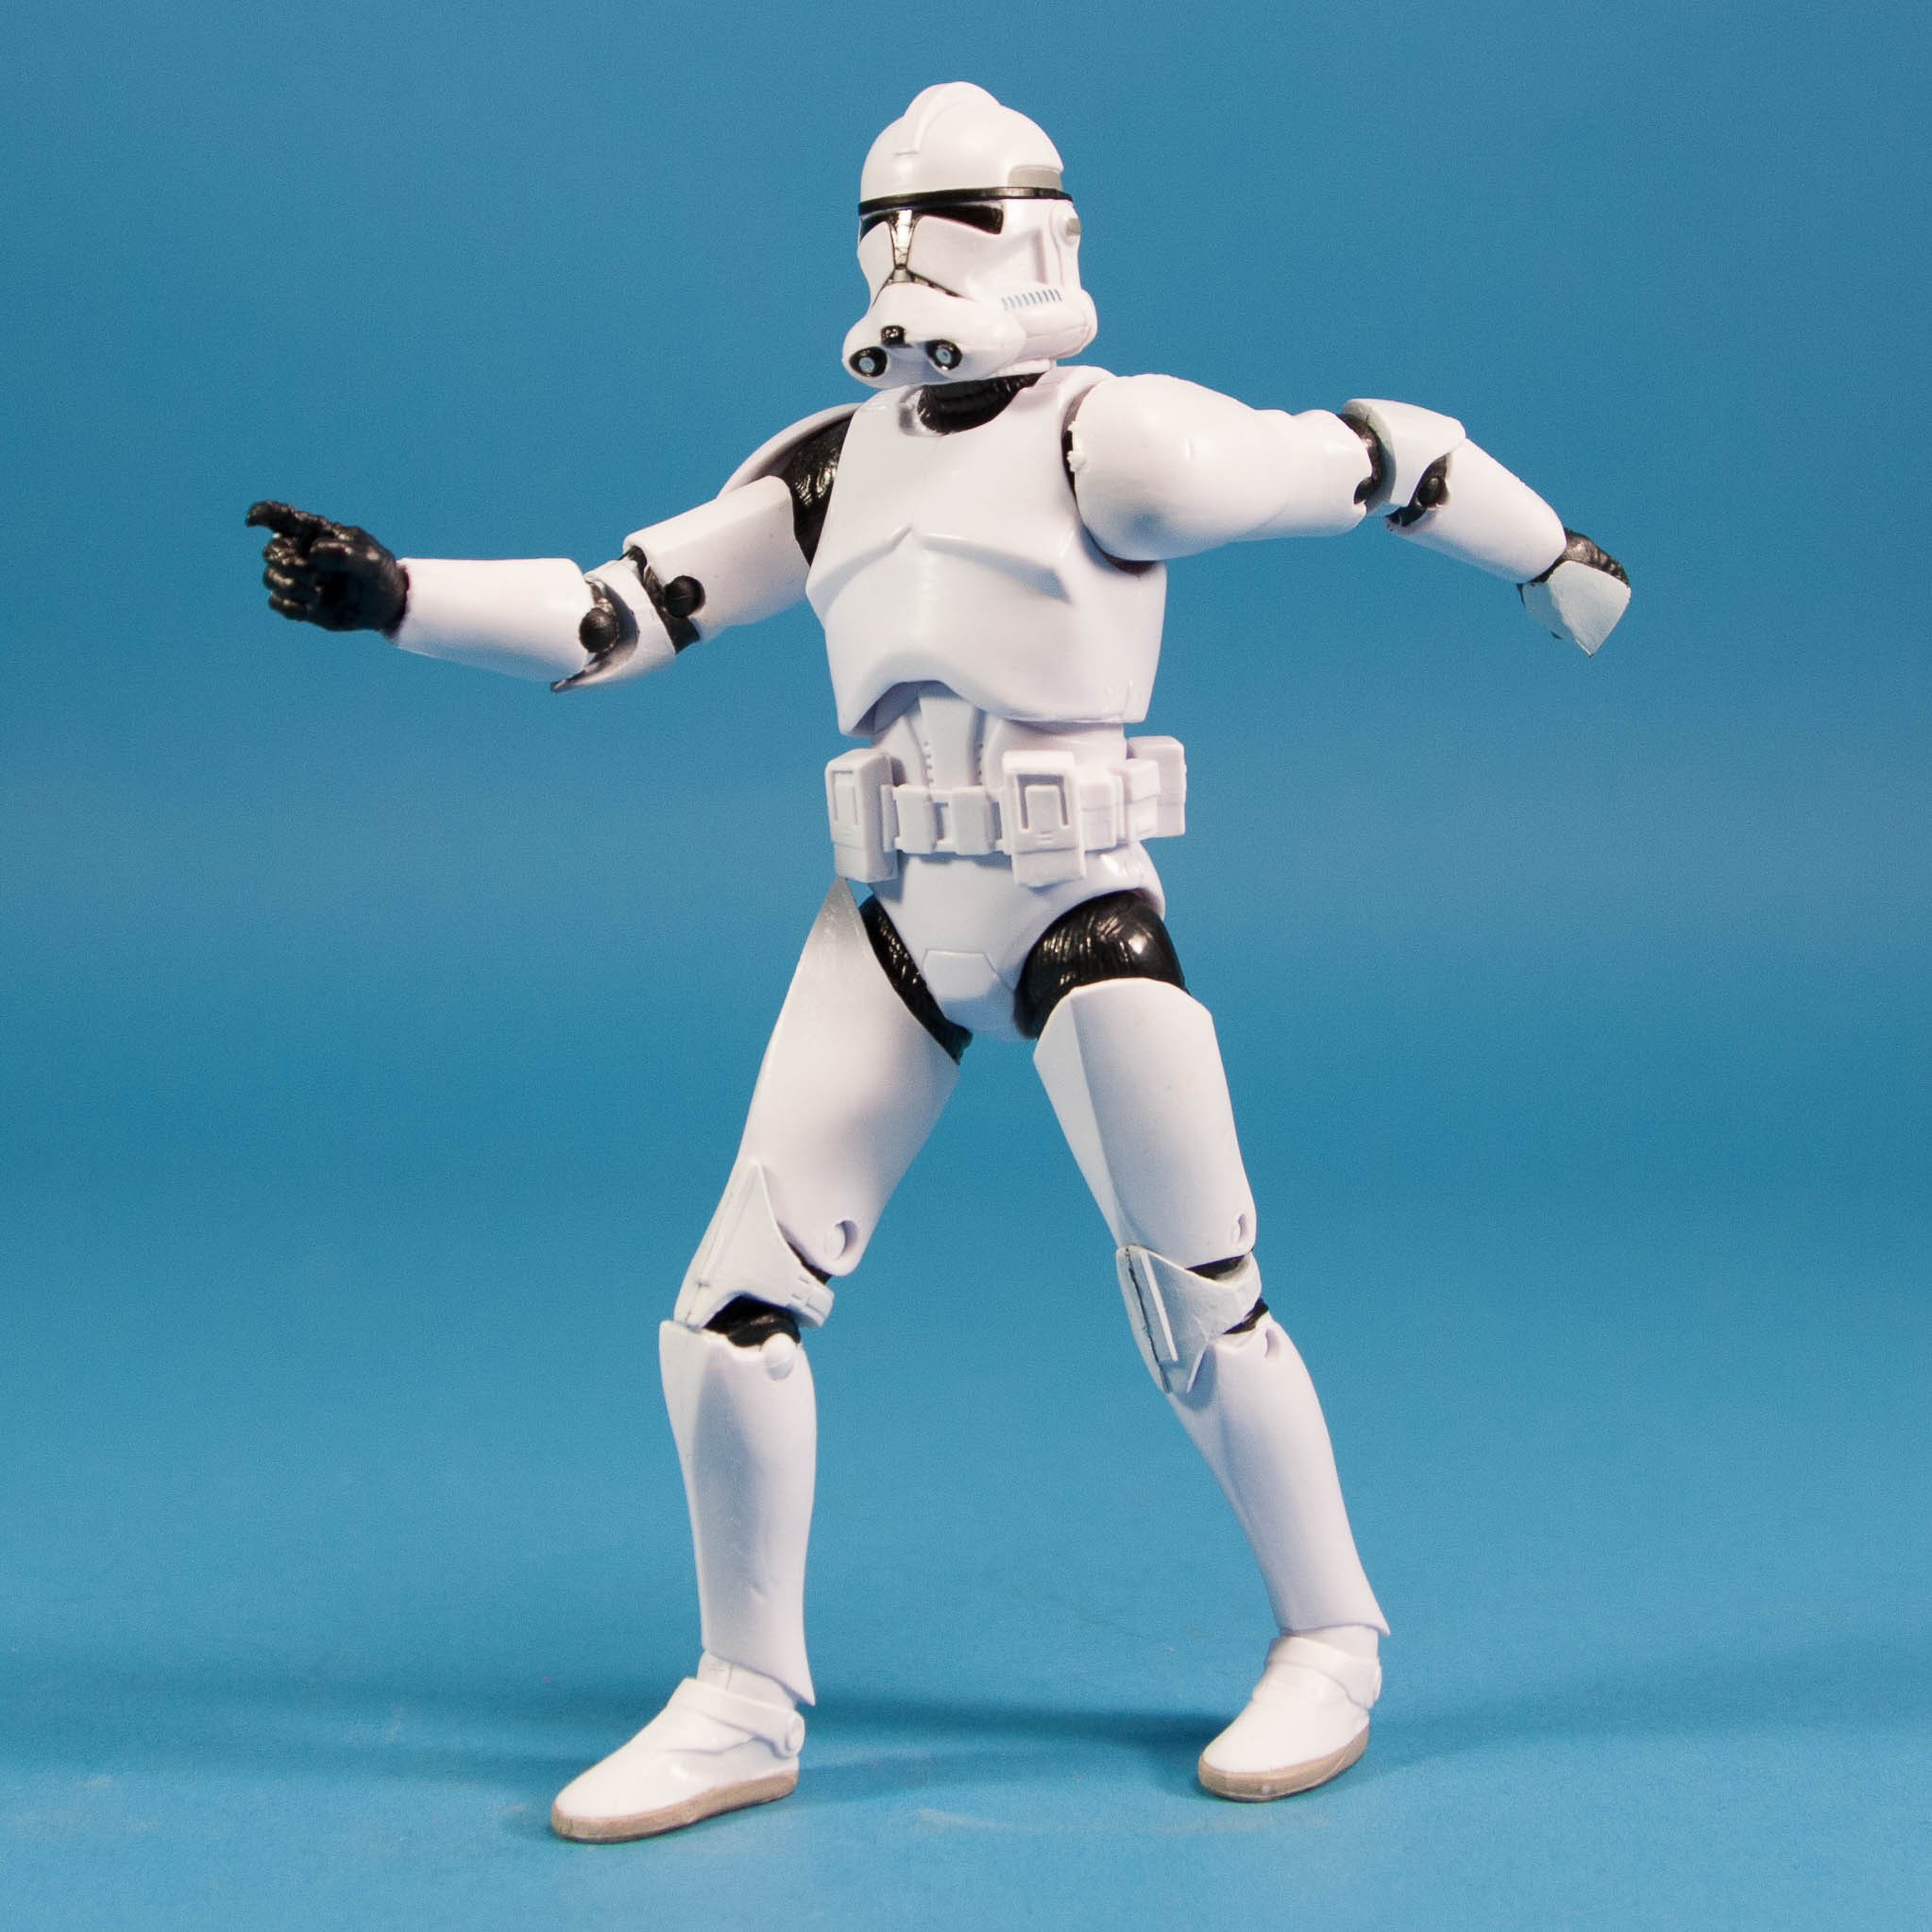 stormtrooper-collection-6-inch-4-pack-amazon-exclusive-014.jpg